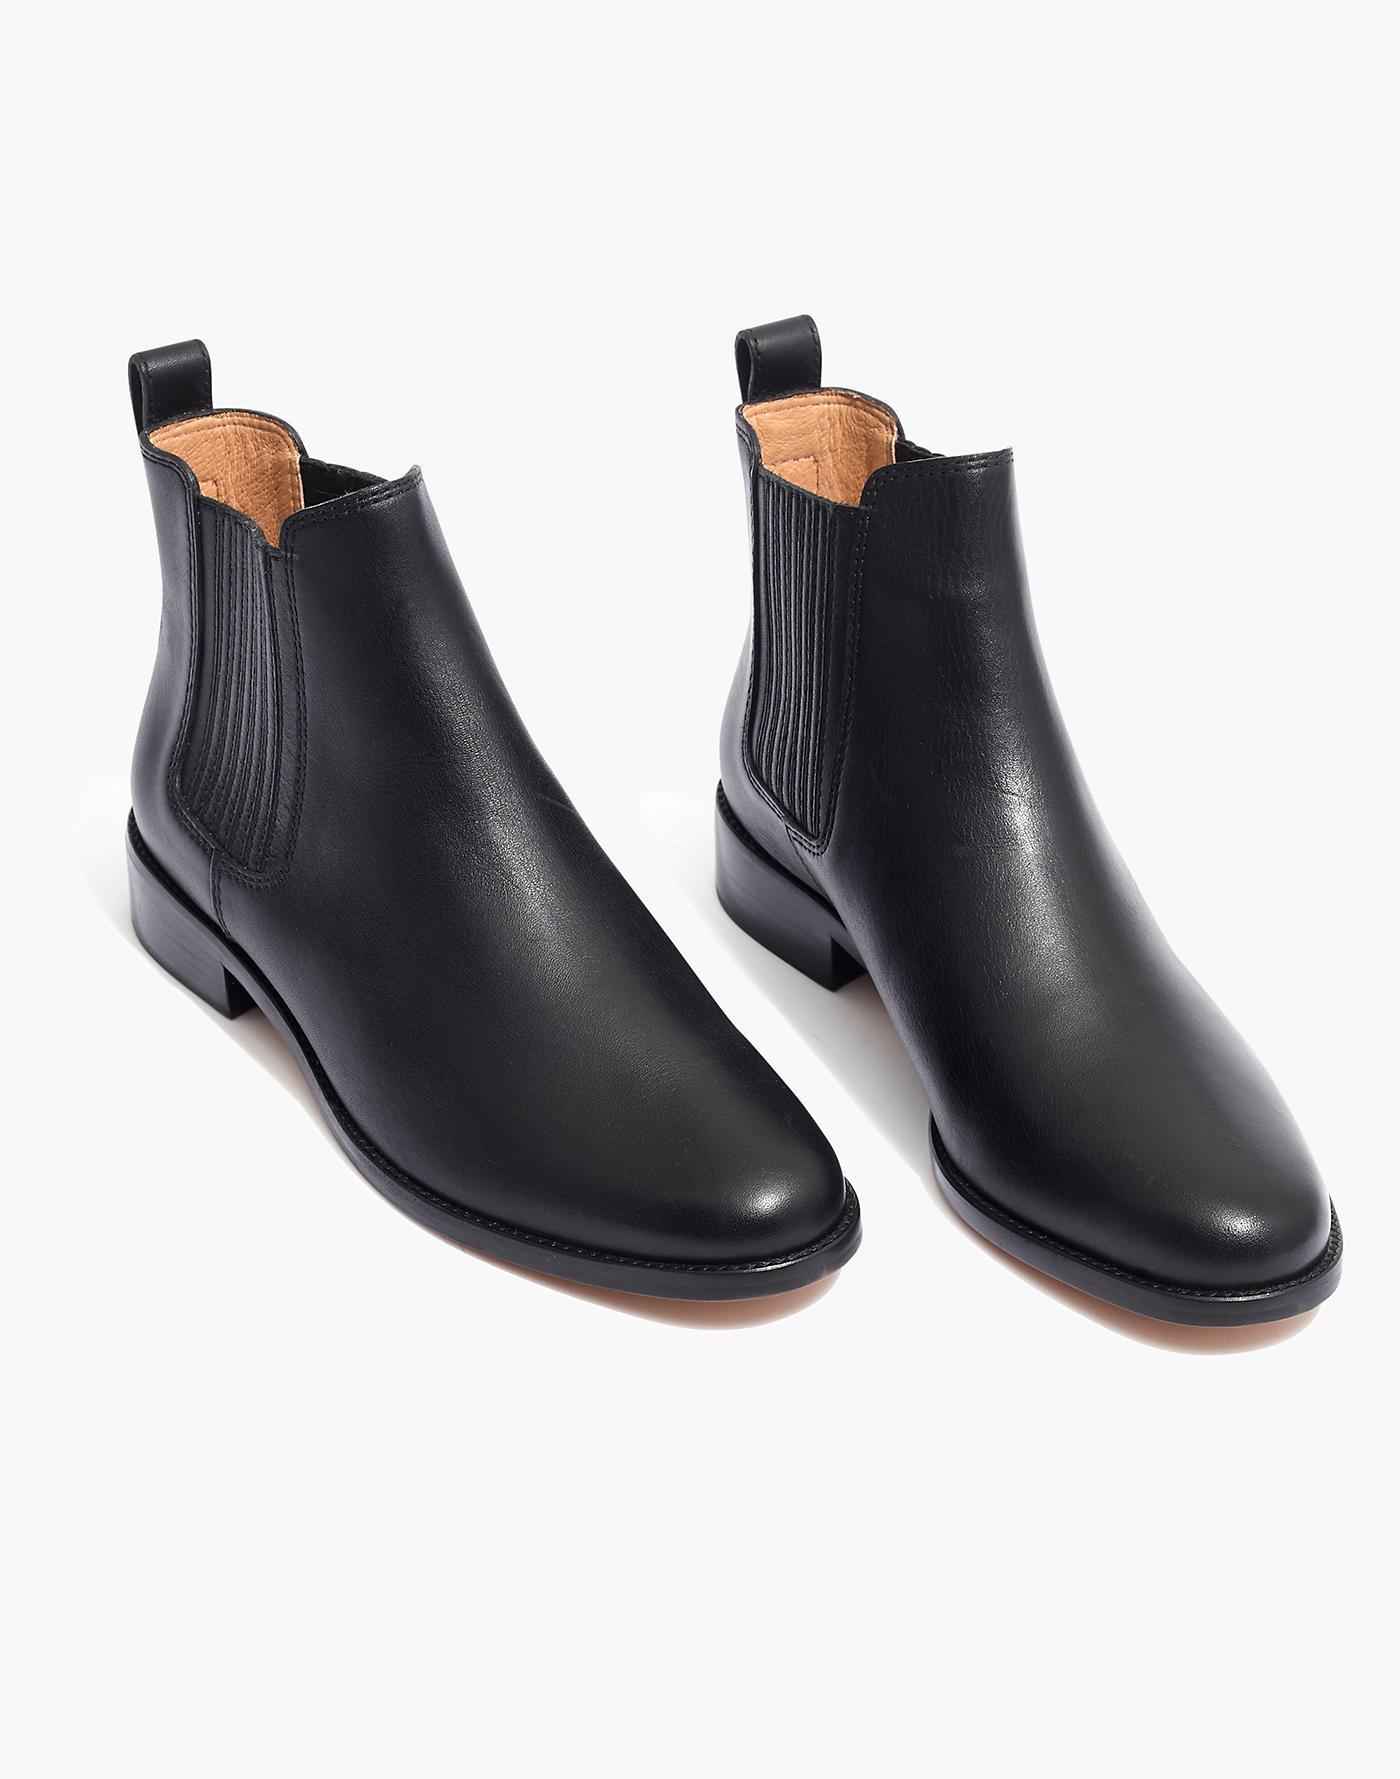 Madewell Leather The Ainsley Chelsea Boot in Black - Lyst